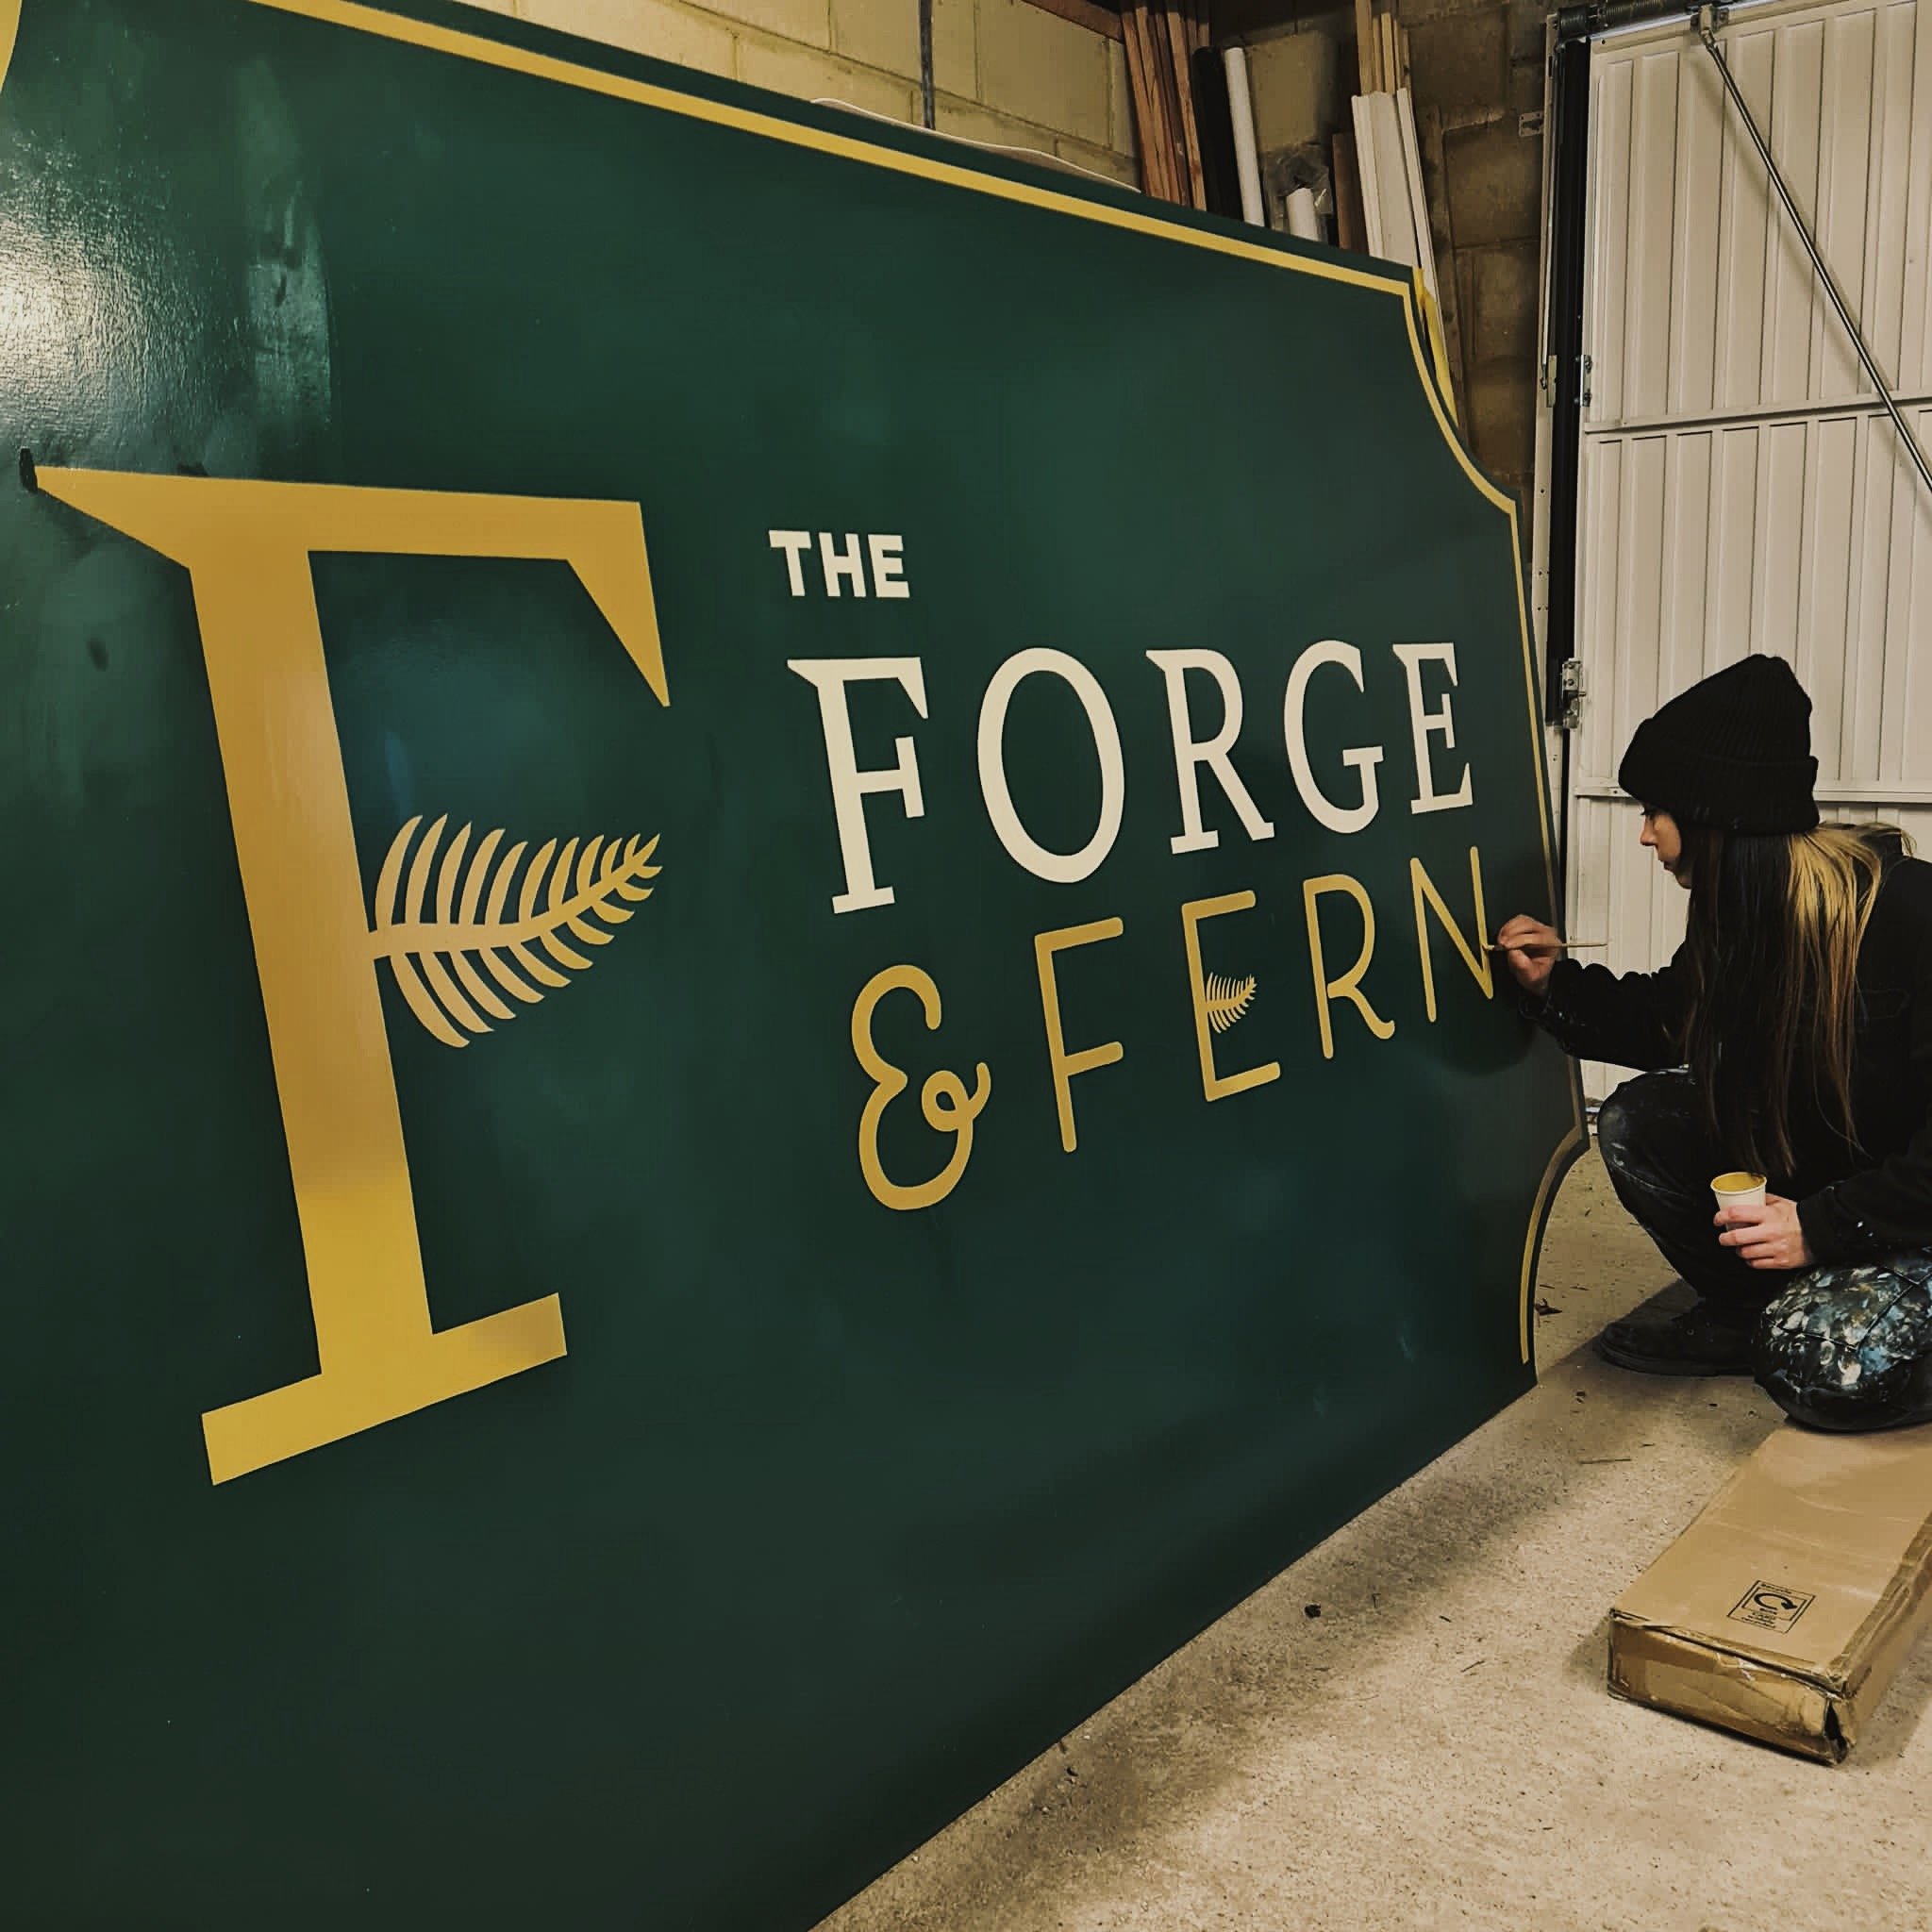 Painting progress of a sign for Bristol restaurant bar Forge and Fern.